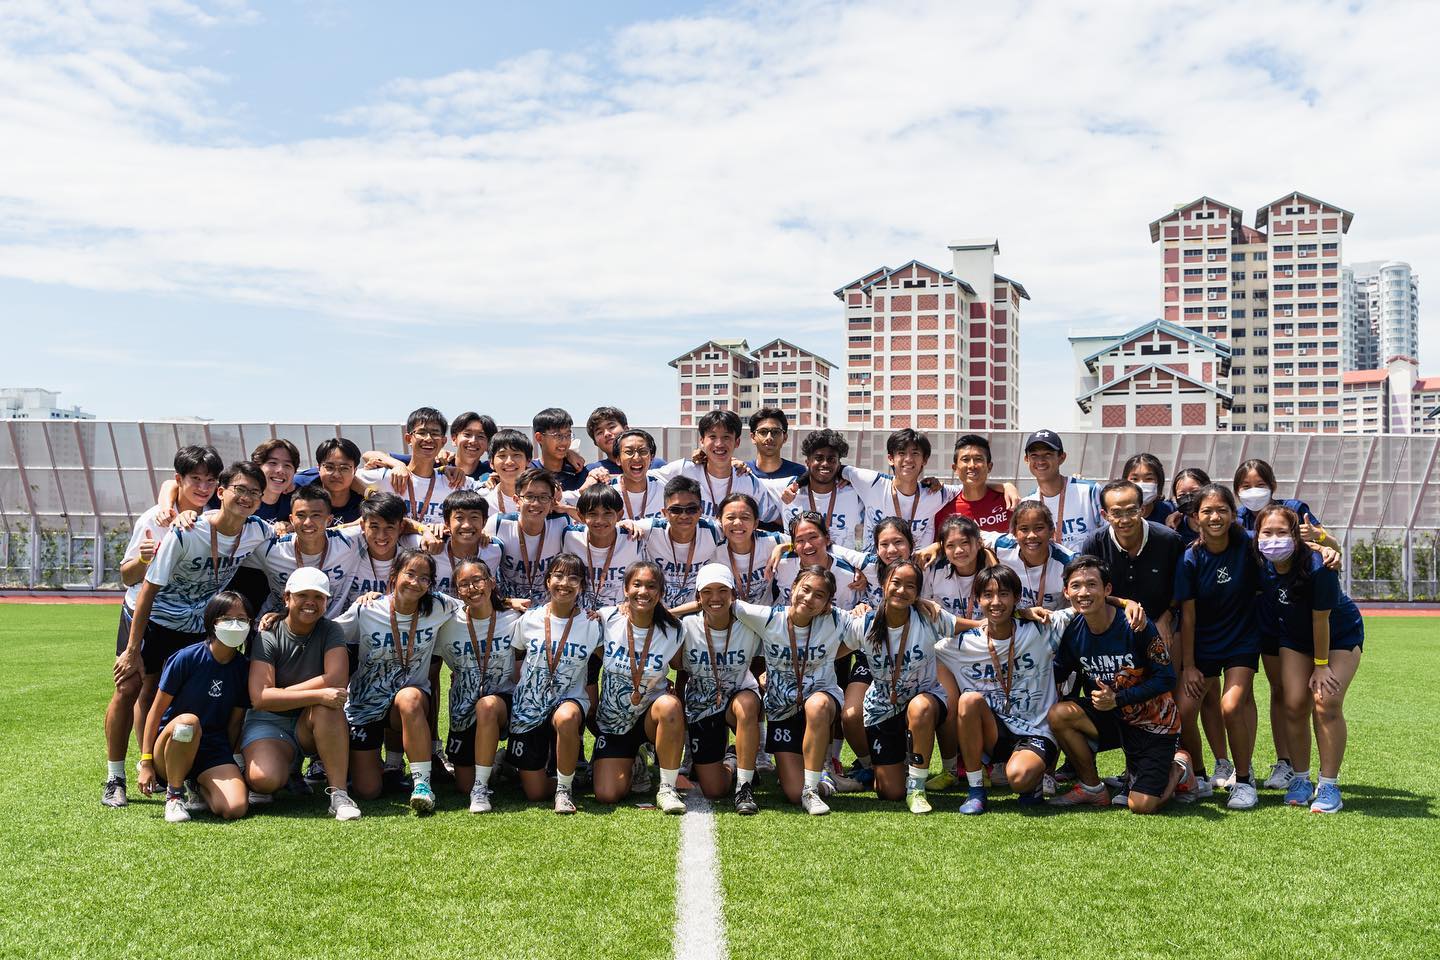 Inter-JCs #Ultimate: St. Andrew’s Junior College (pic) finished third in the tournament after beating Raffles Institution 8-4 in the 3rd/4th placing match. 

Story to come on REDSPORTS.SG. (Photo by Bryan Foo/Red Sports)